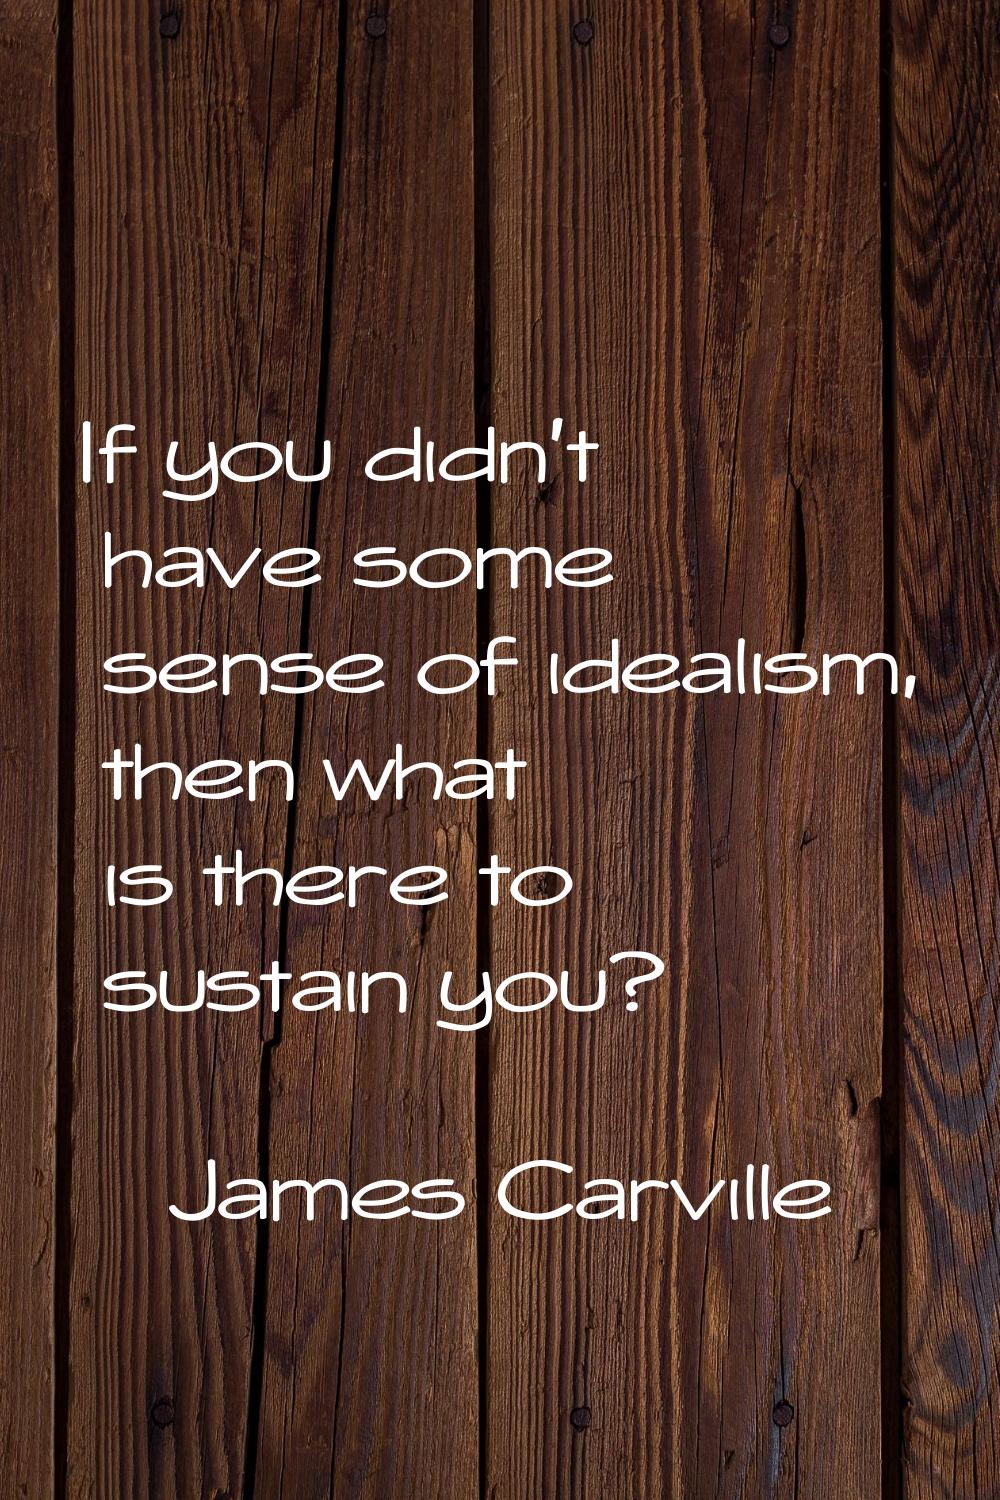 If you didn't have some sense of idealism, then what is there to sustain you?